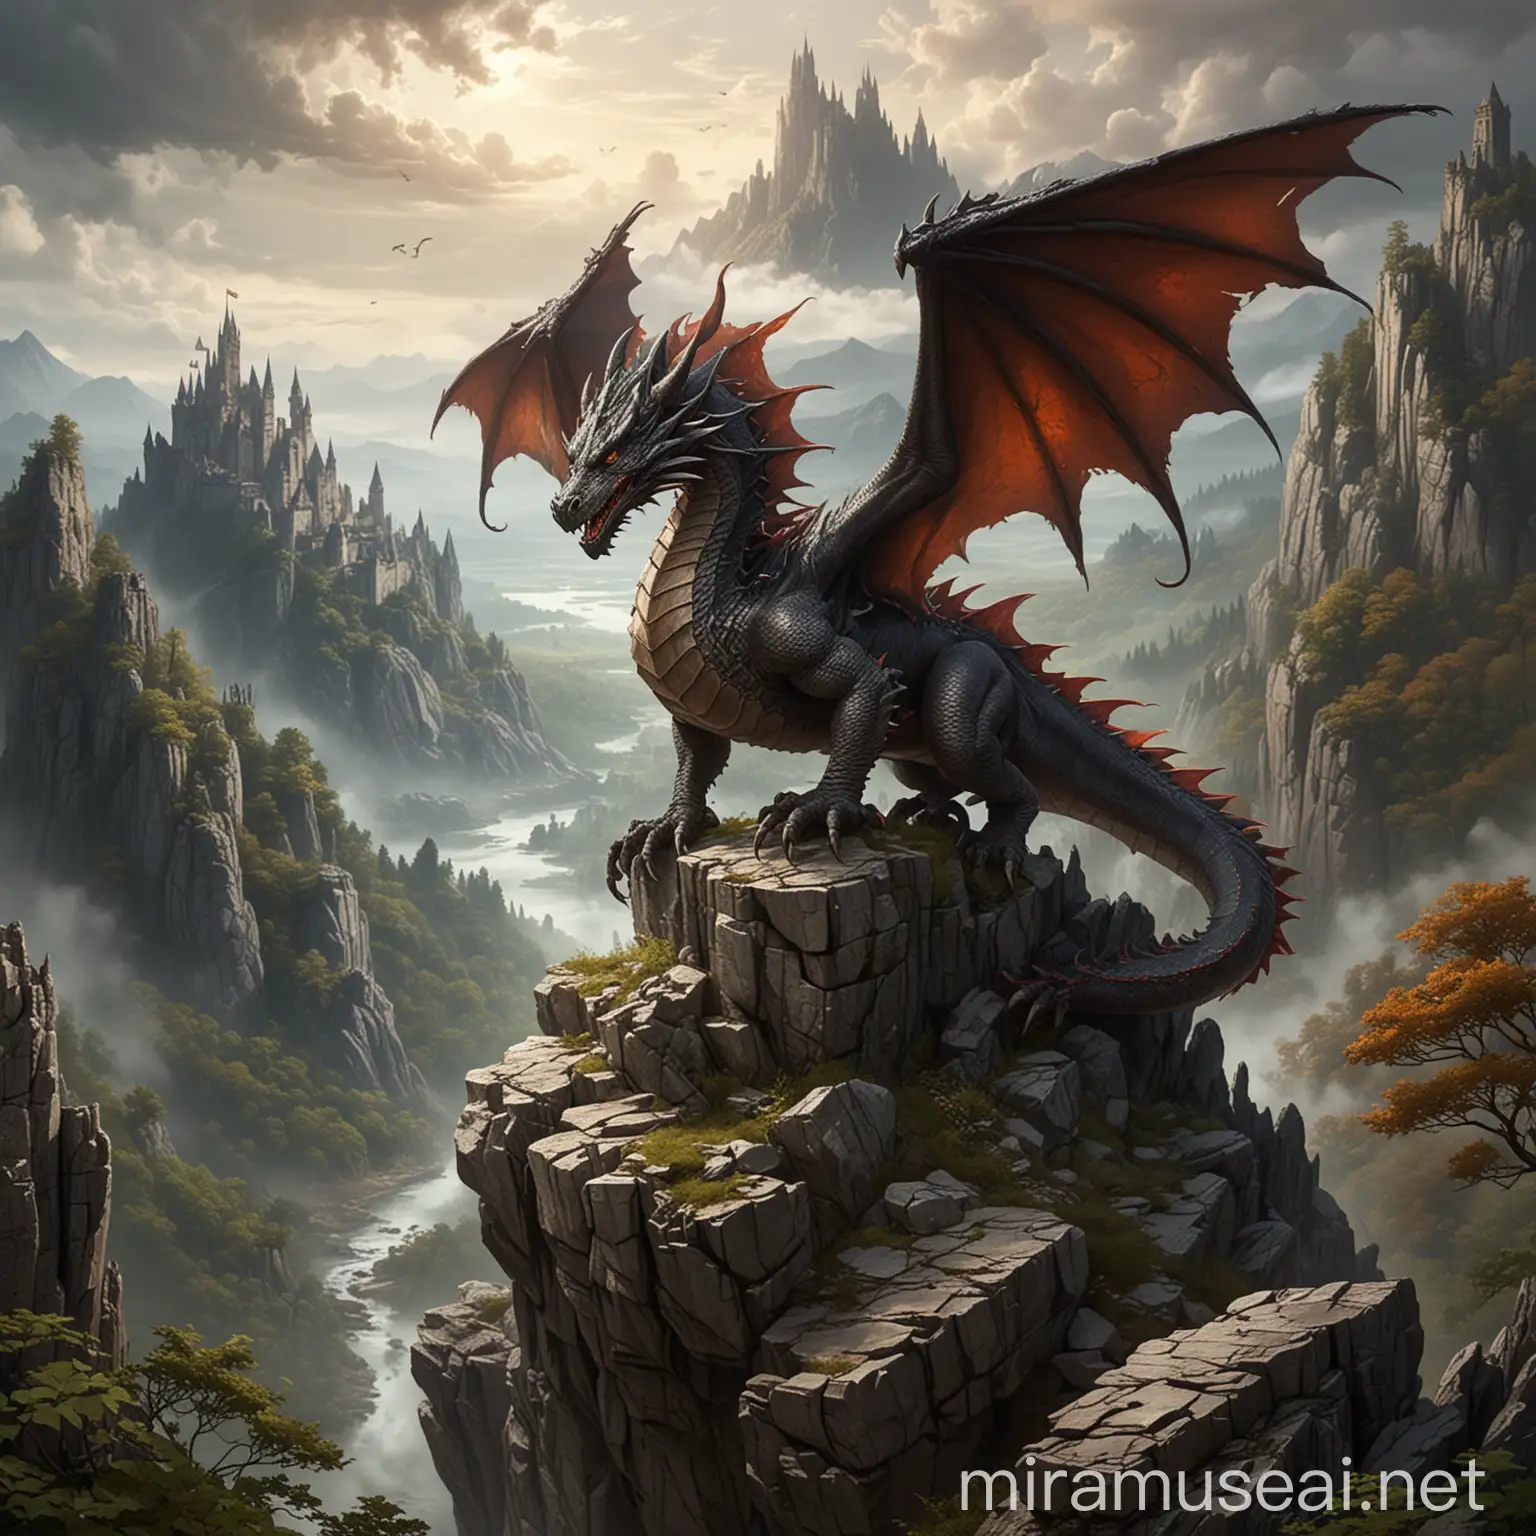 Majestic Dragon atop Mountain Overlooking Forest and Castle